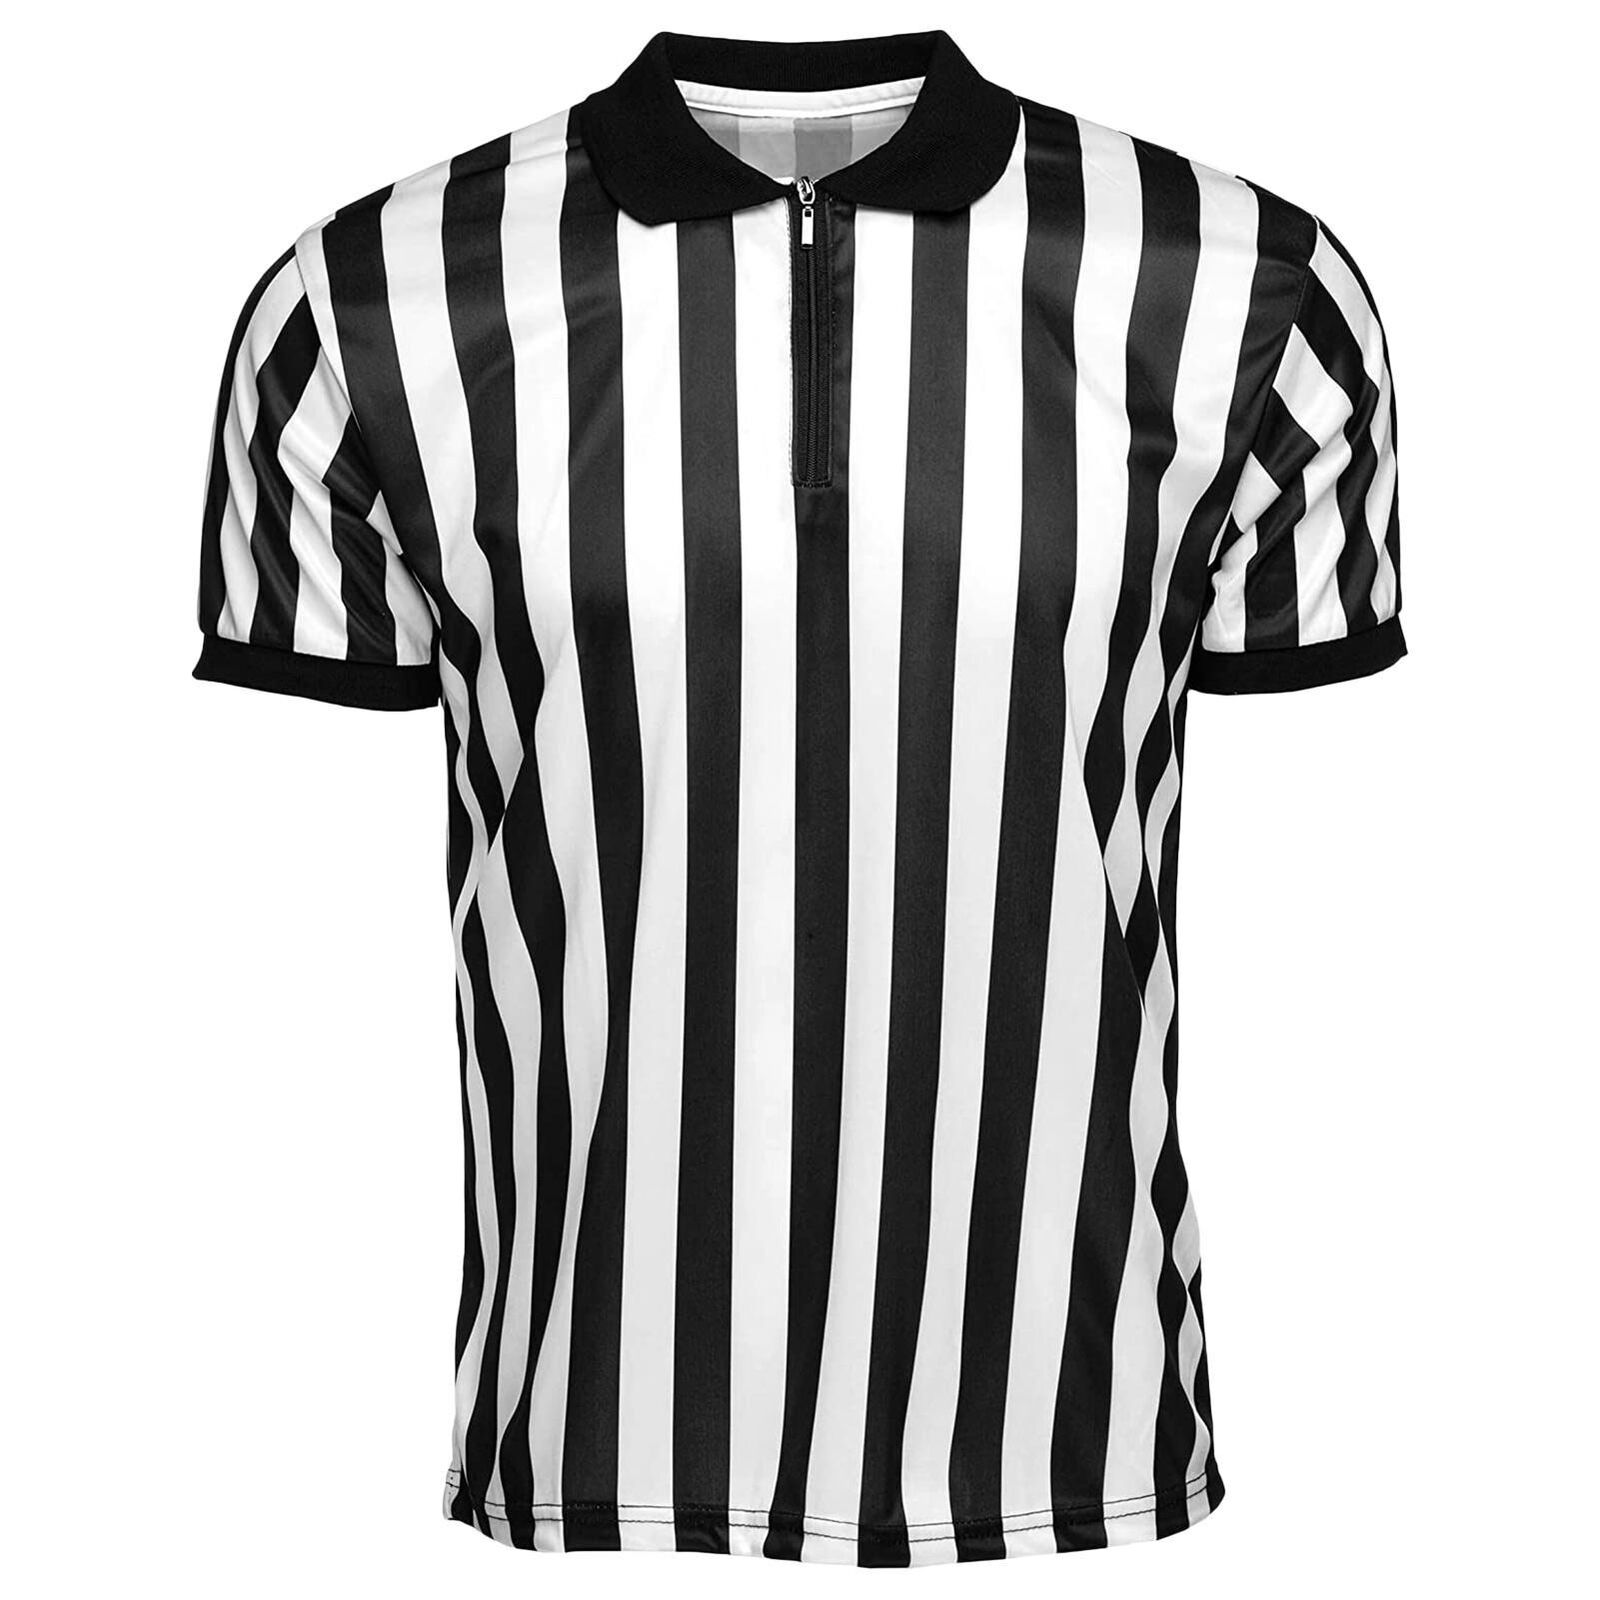 Striped Referee Shirt Breathable Collared Short Sleeve T Shirt Black White great